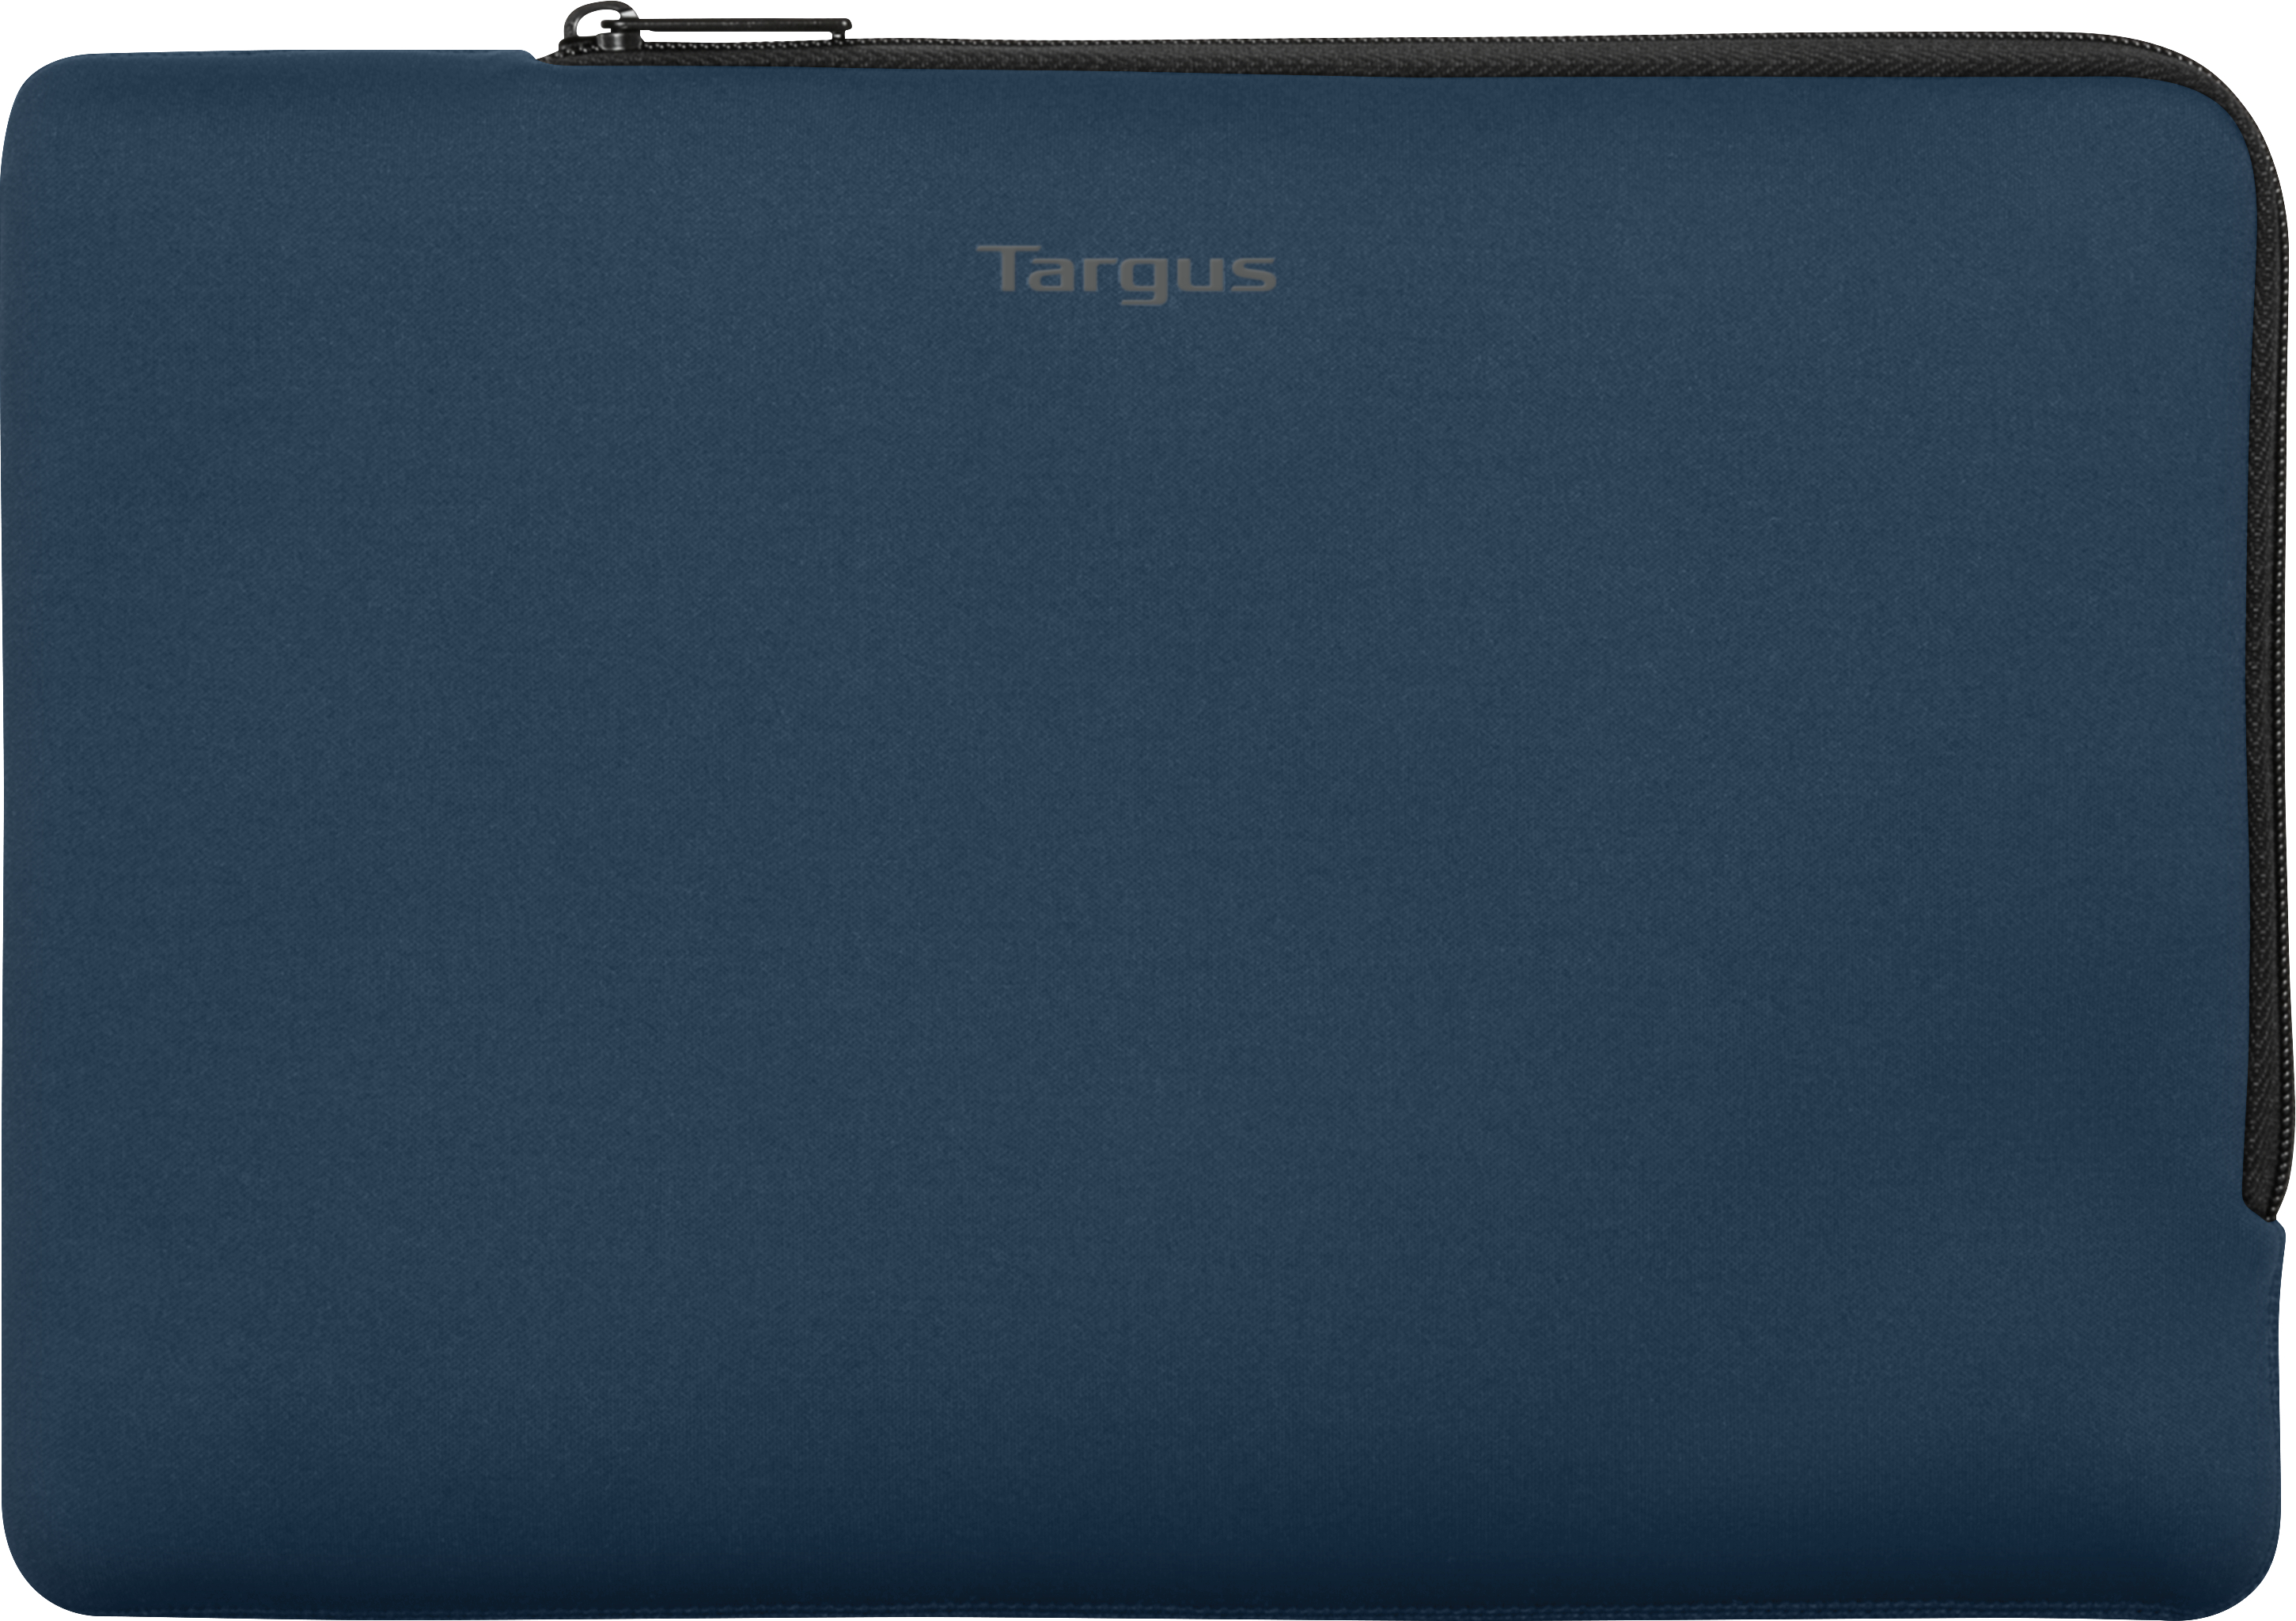 TARGUS Ecosmart MultiFit Sleeve Blue TBS65202GL for Universal 15-16 Inch for Universal 15-16 Inch